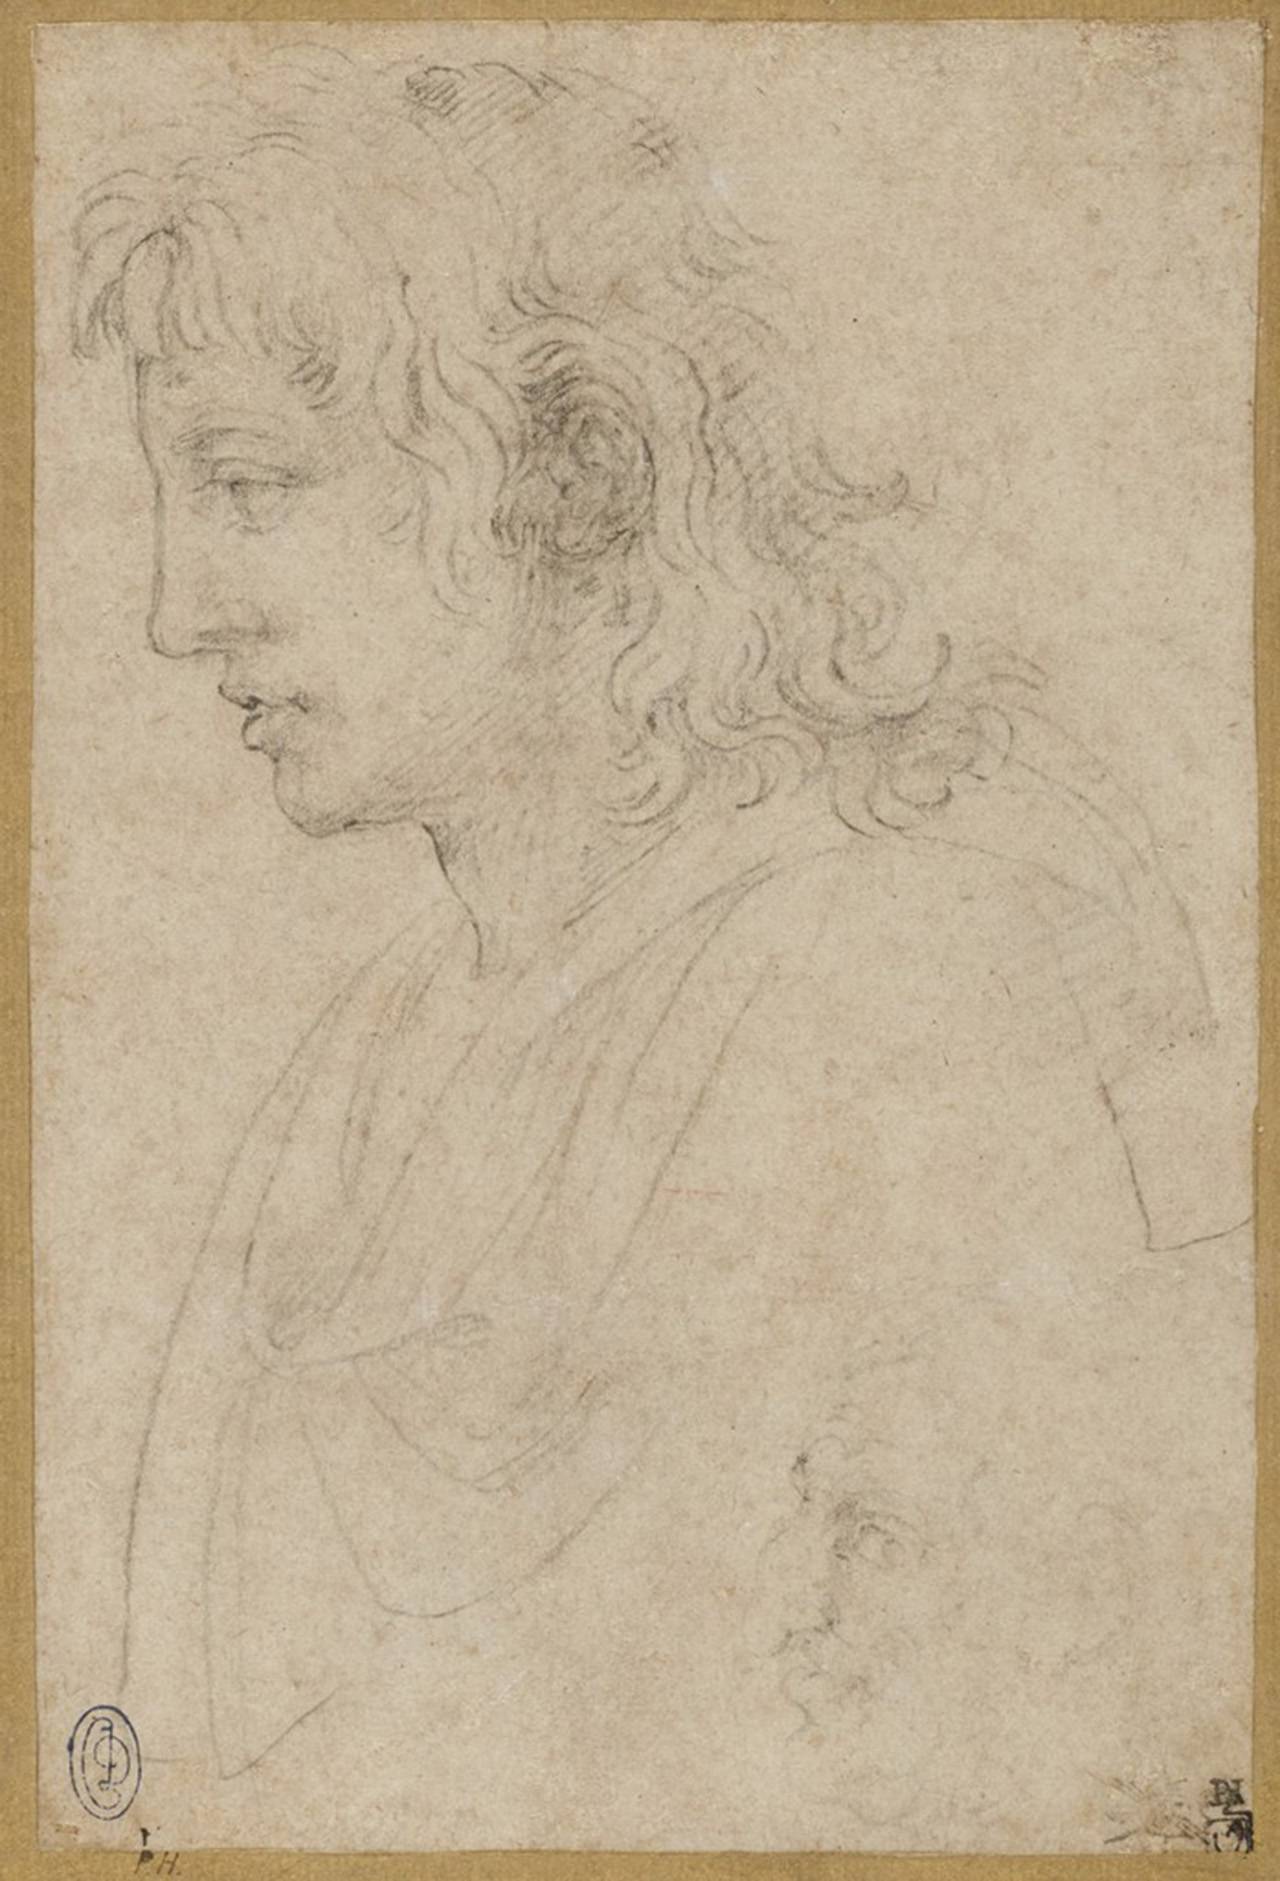 Michelangelo drawing of a bust of a youth and a caricature of an old man